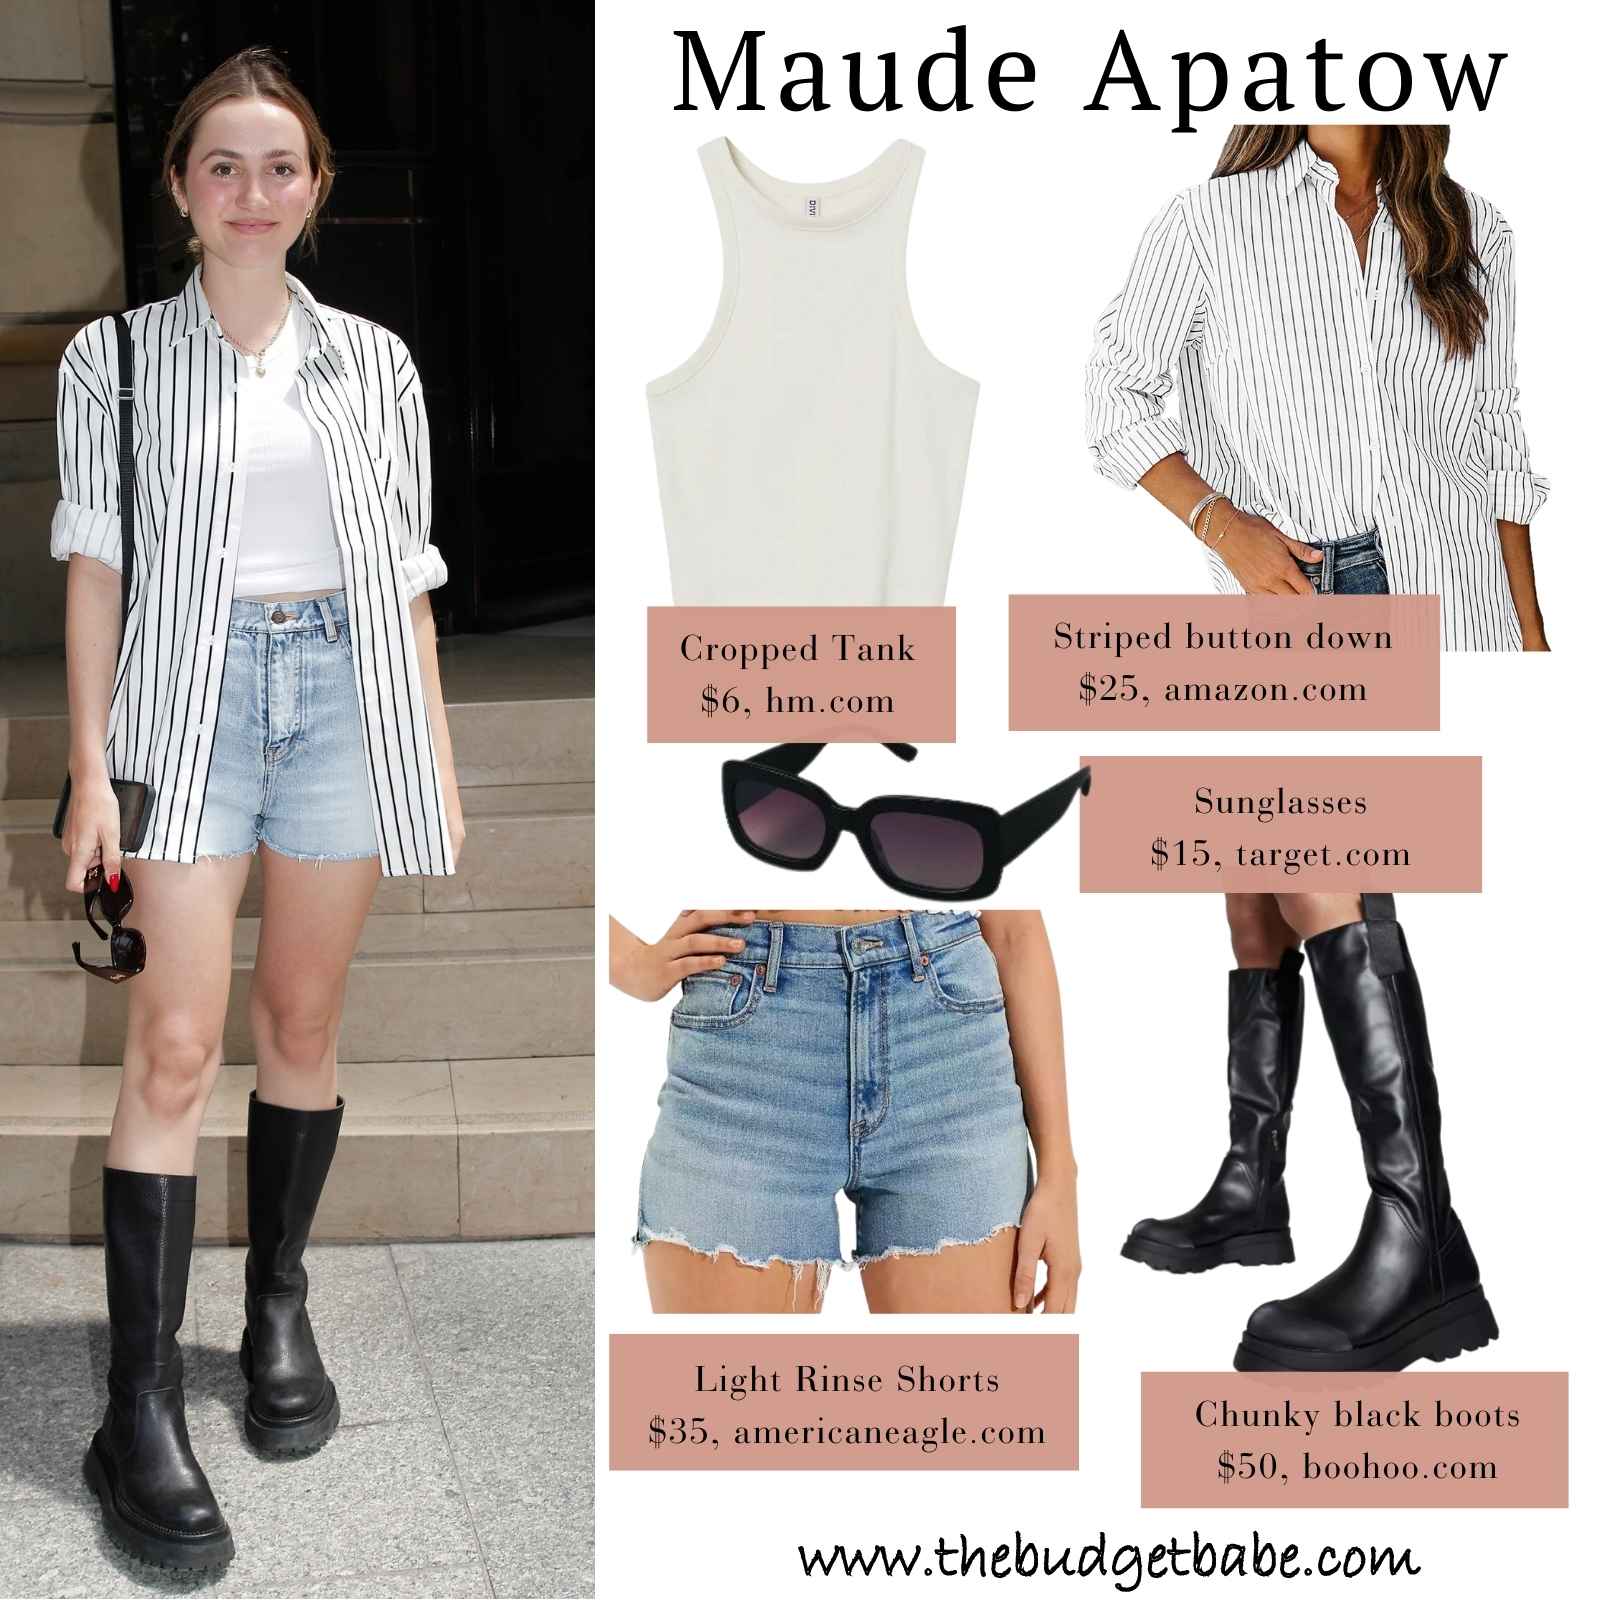 Maude Apatow Casual Shorts and Button Down Celebrity Looks for Less